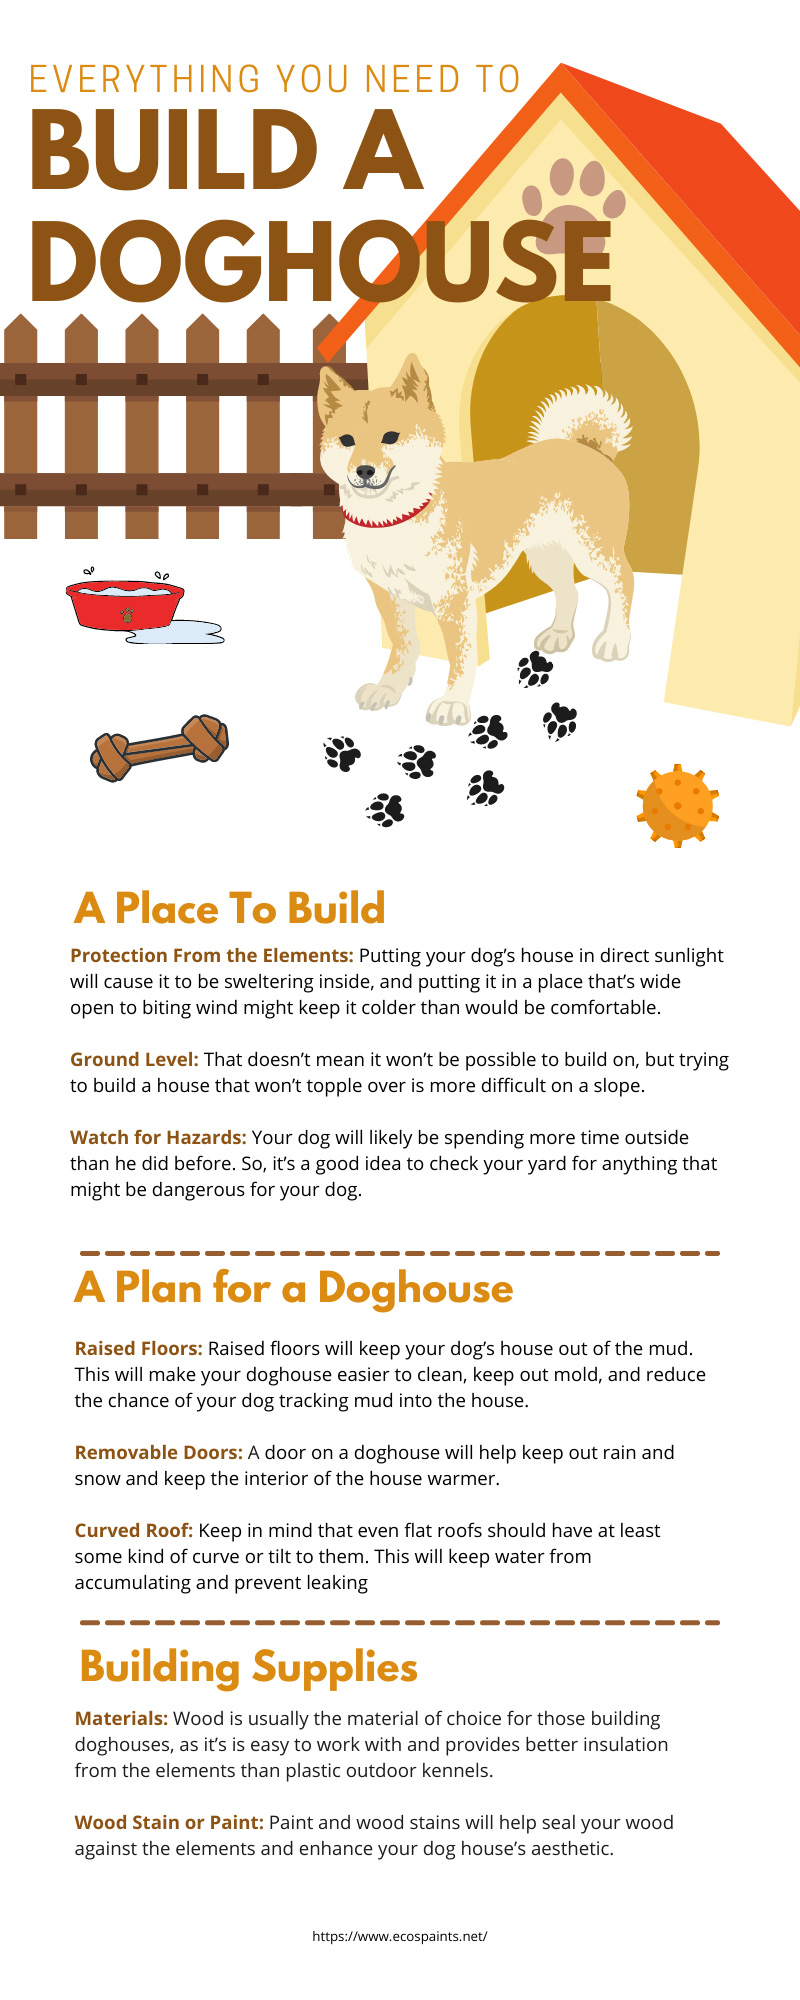 Everything You Need To Build a Doghouse
